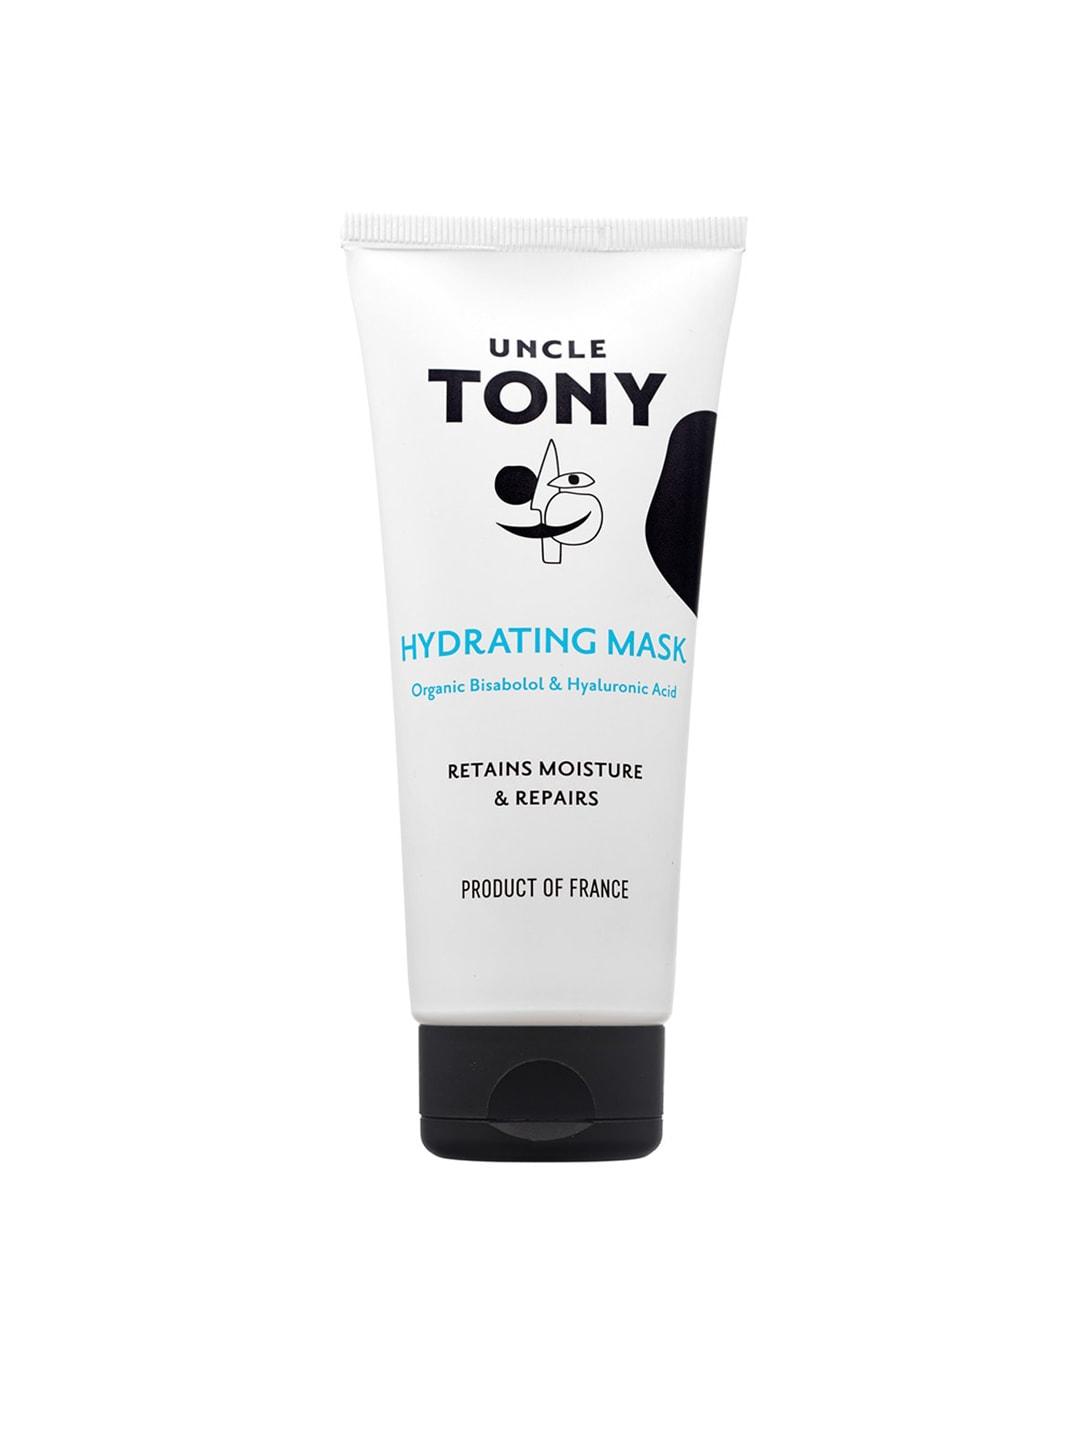 UNCLE TONY Hydrating Mask with Organic Bisabolol & Hyaluronic Acid 100 ml